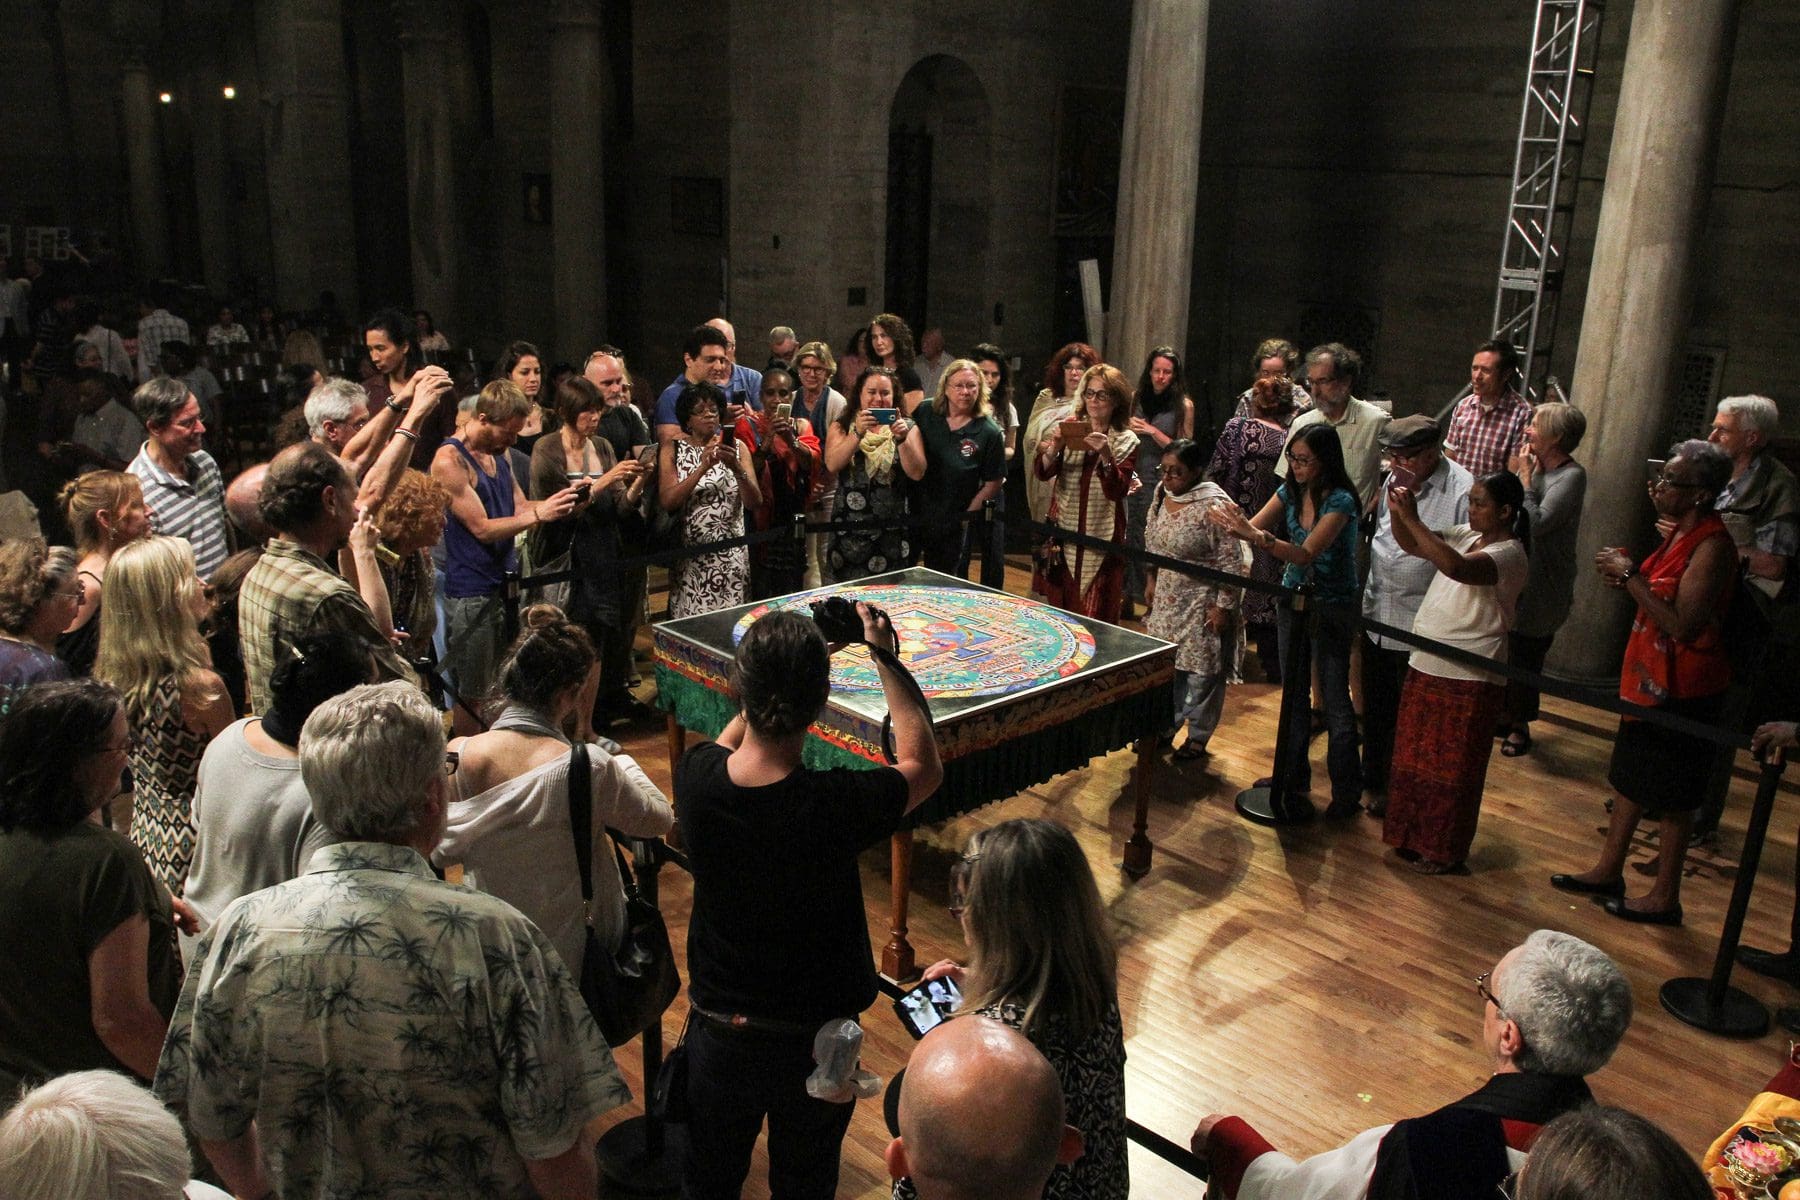 Audience photographs the Mandala of Compassion